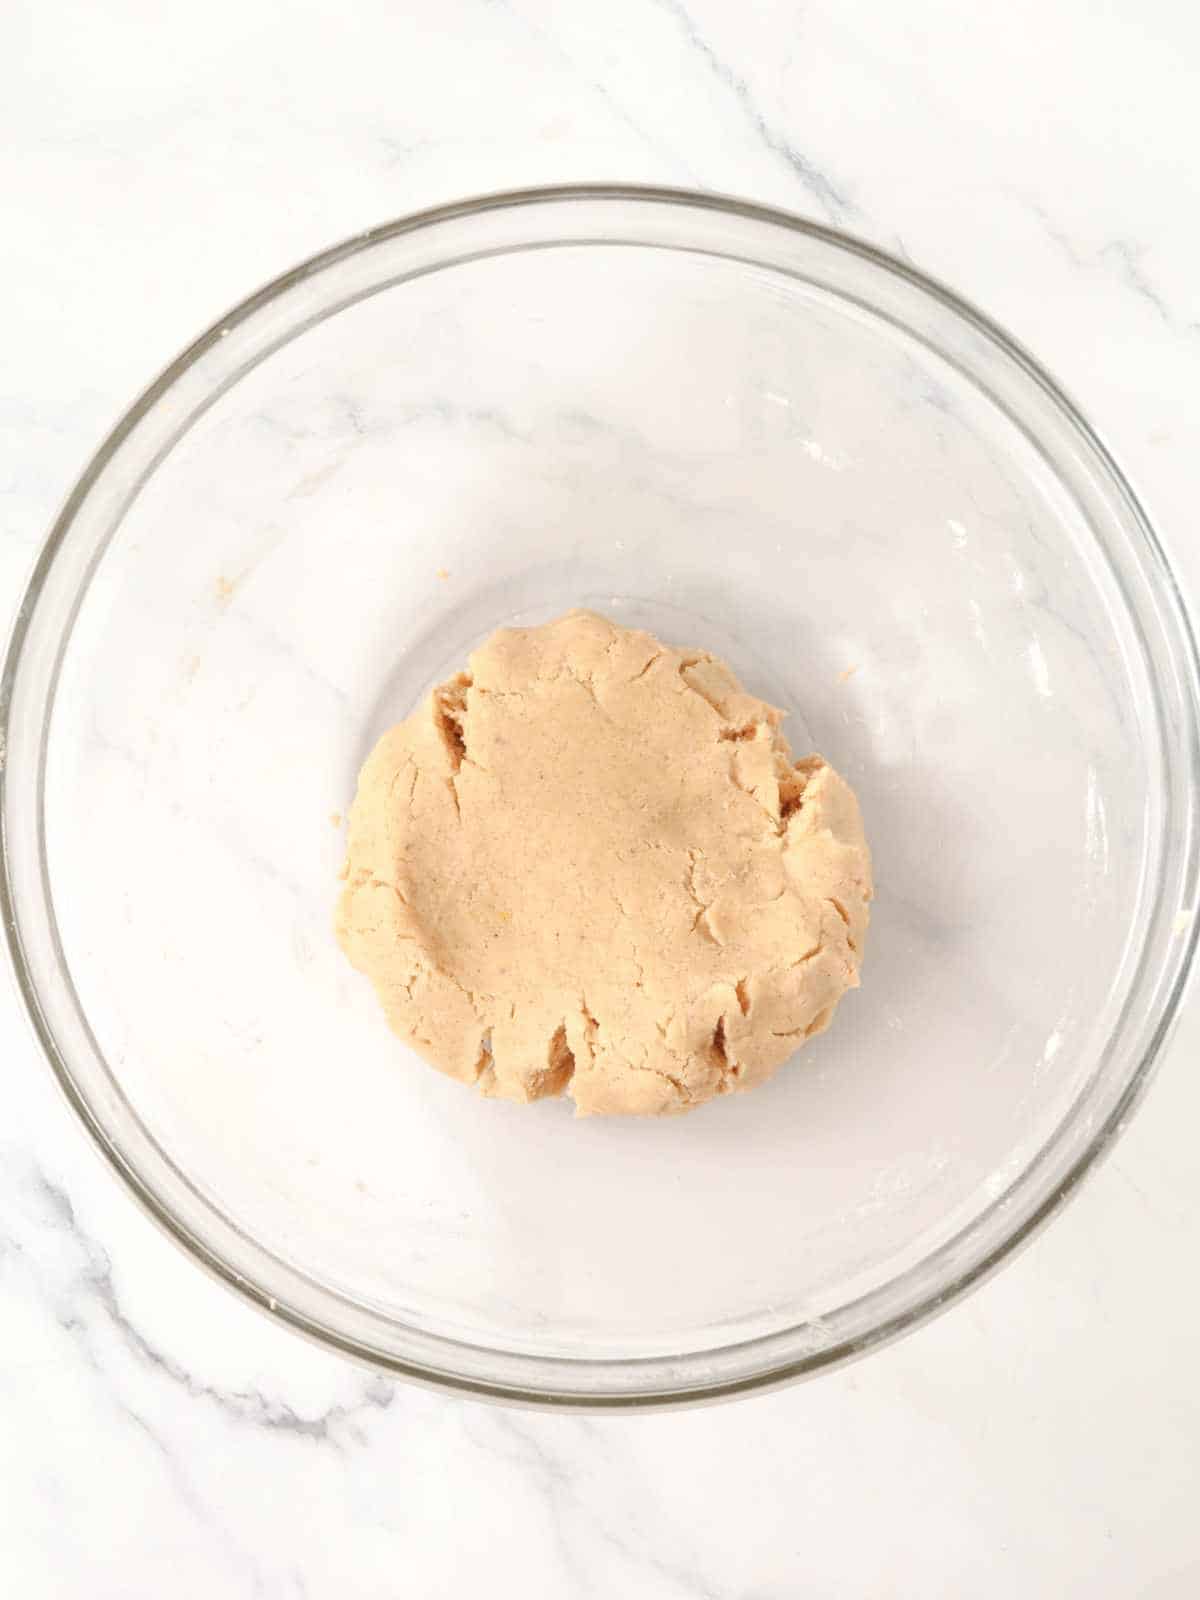 Prepared shortbread cookie dough in a bowl ready to be rolled out for cutting.